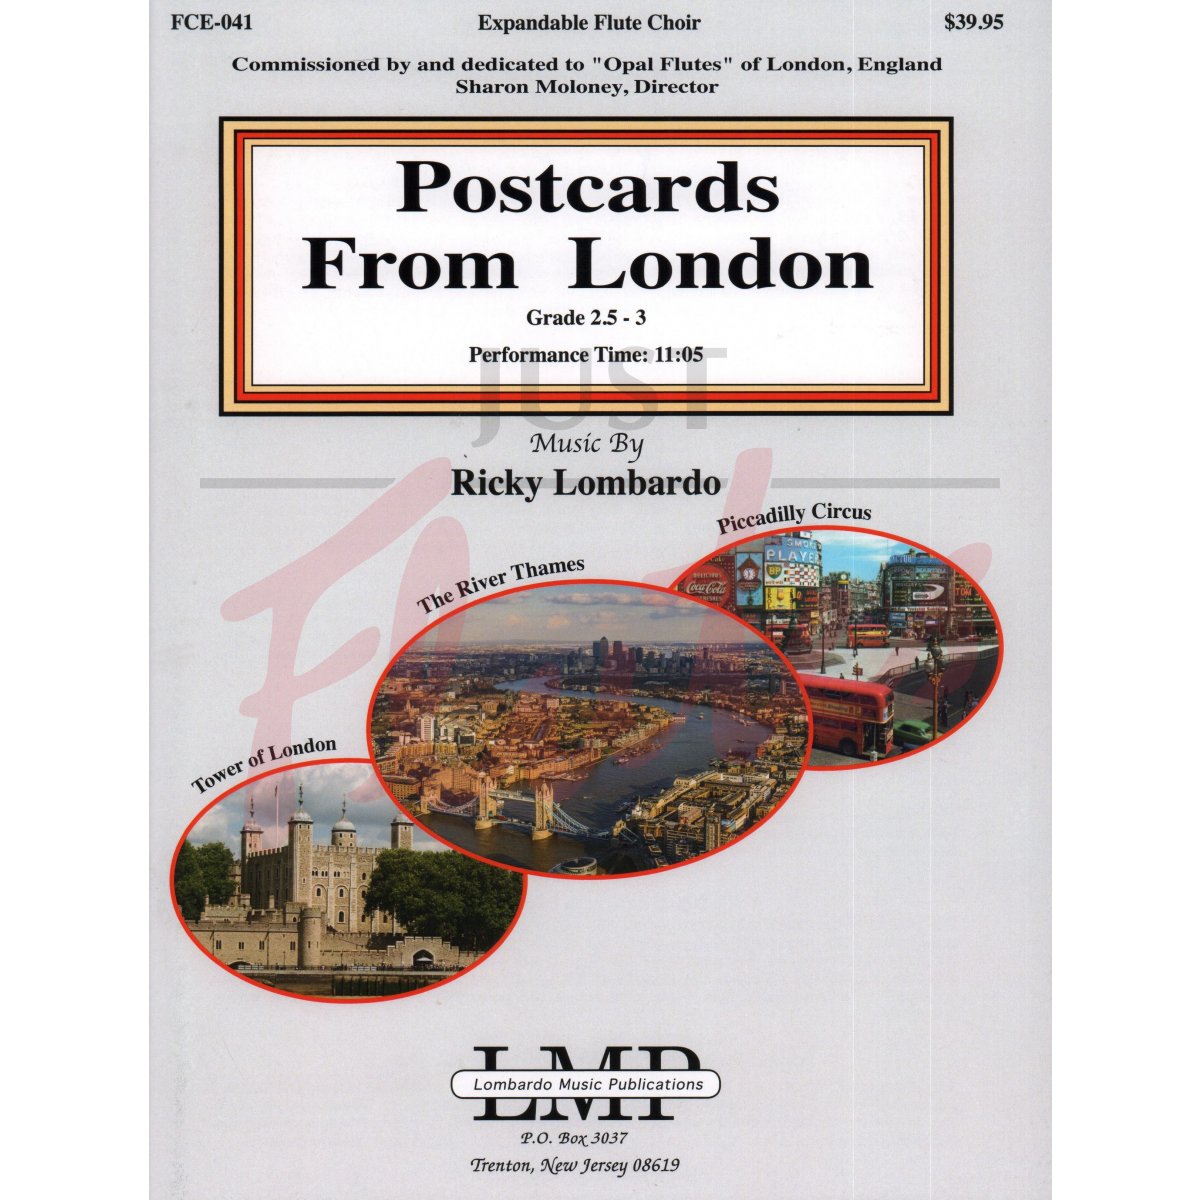 Postcards from London for Flute Choir